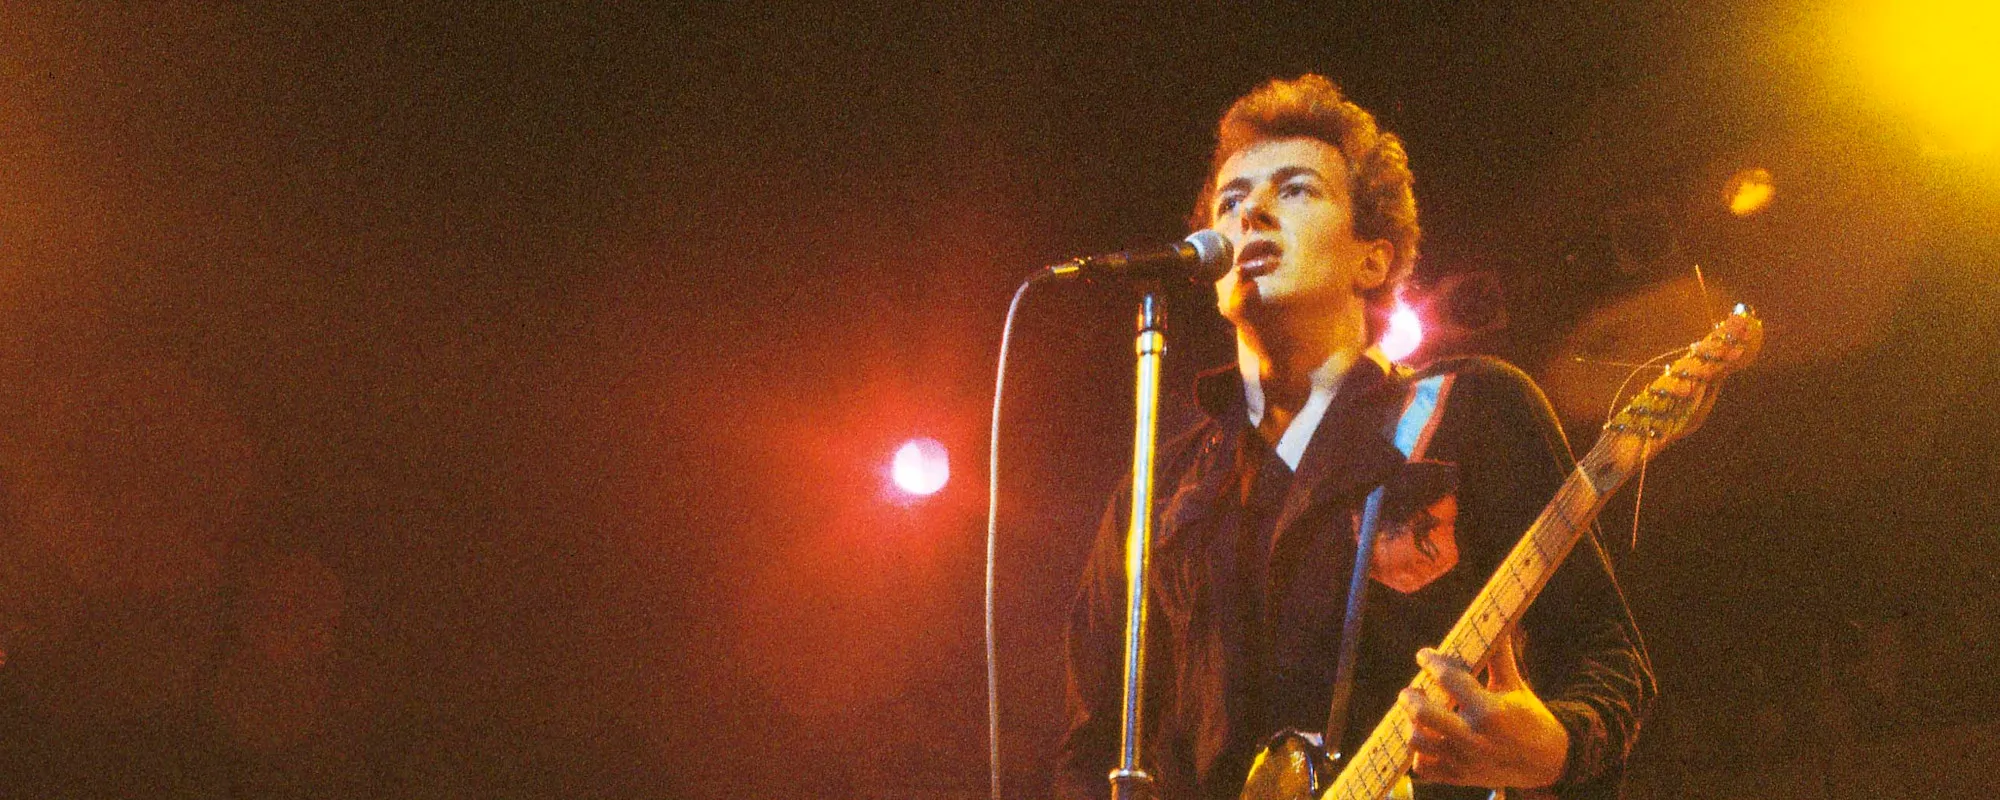 5 Fascinating Facts About The Clash’s Joe Strummer